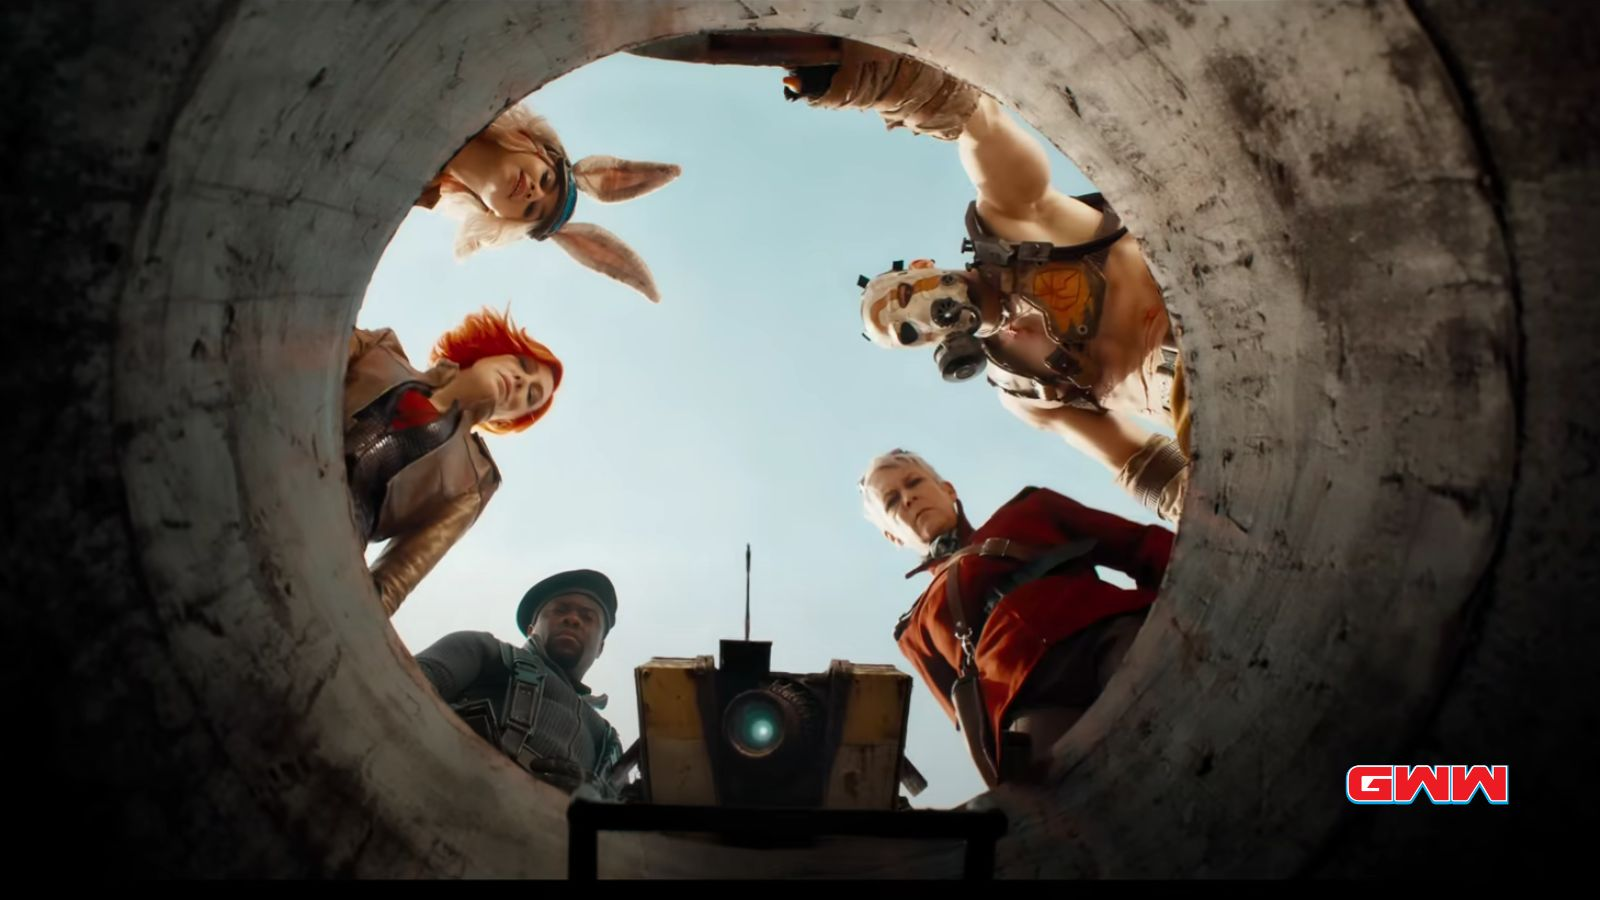 Main casts of Borderlands movie looking down a hole